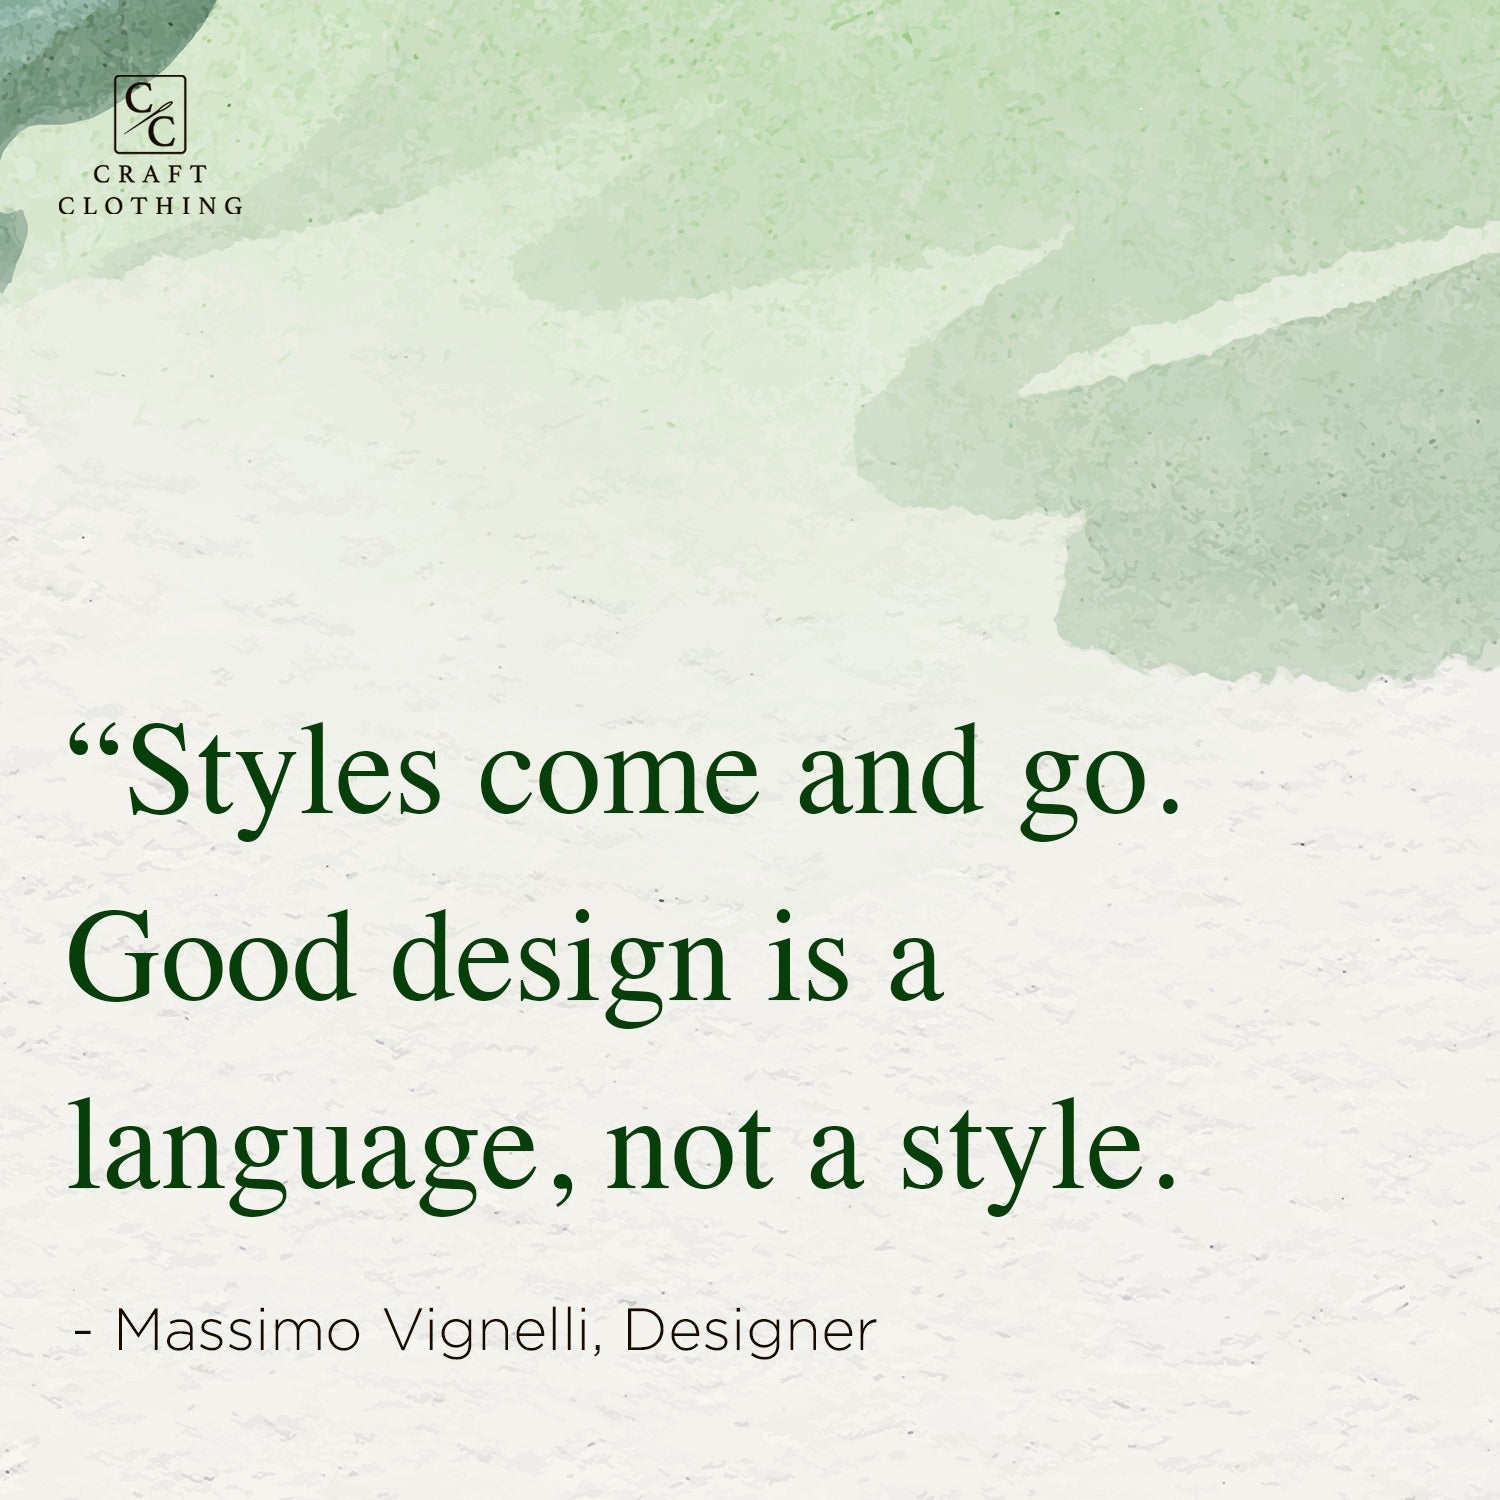 Styles come and go. Good design is a language, not a style.